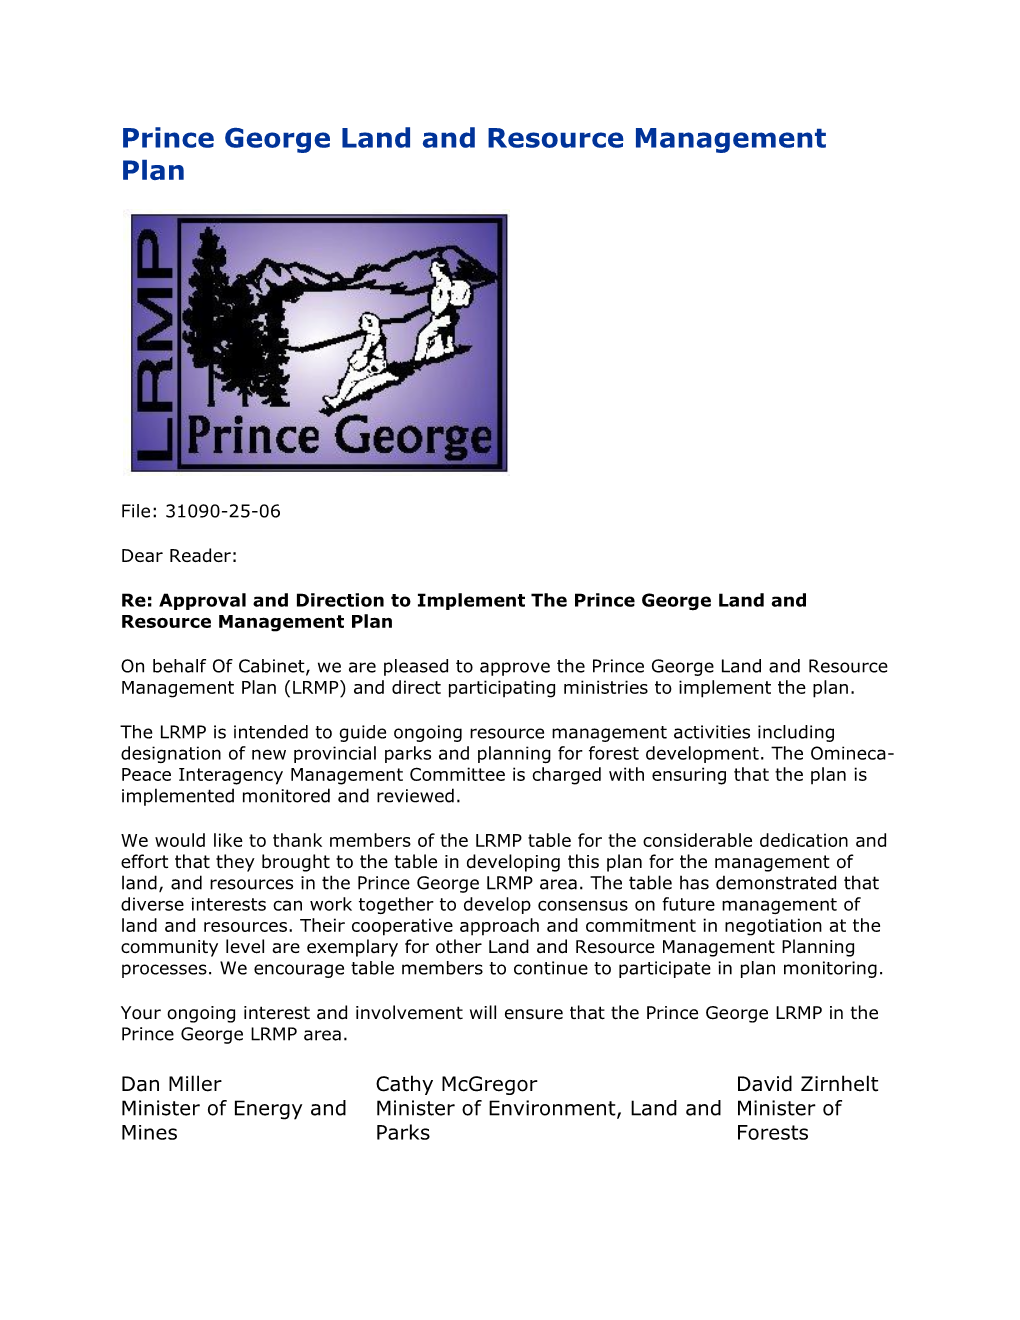 Prince George Land and Resource Management Plan